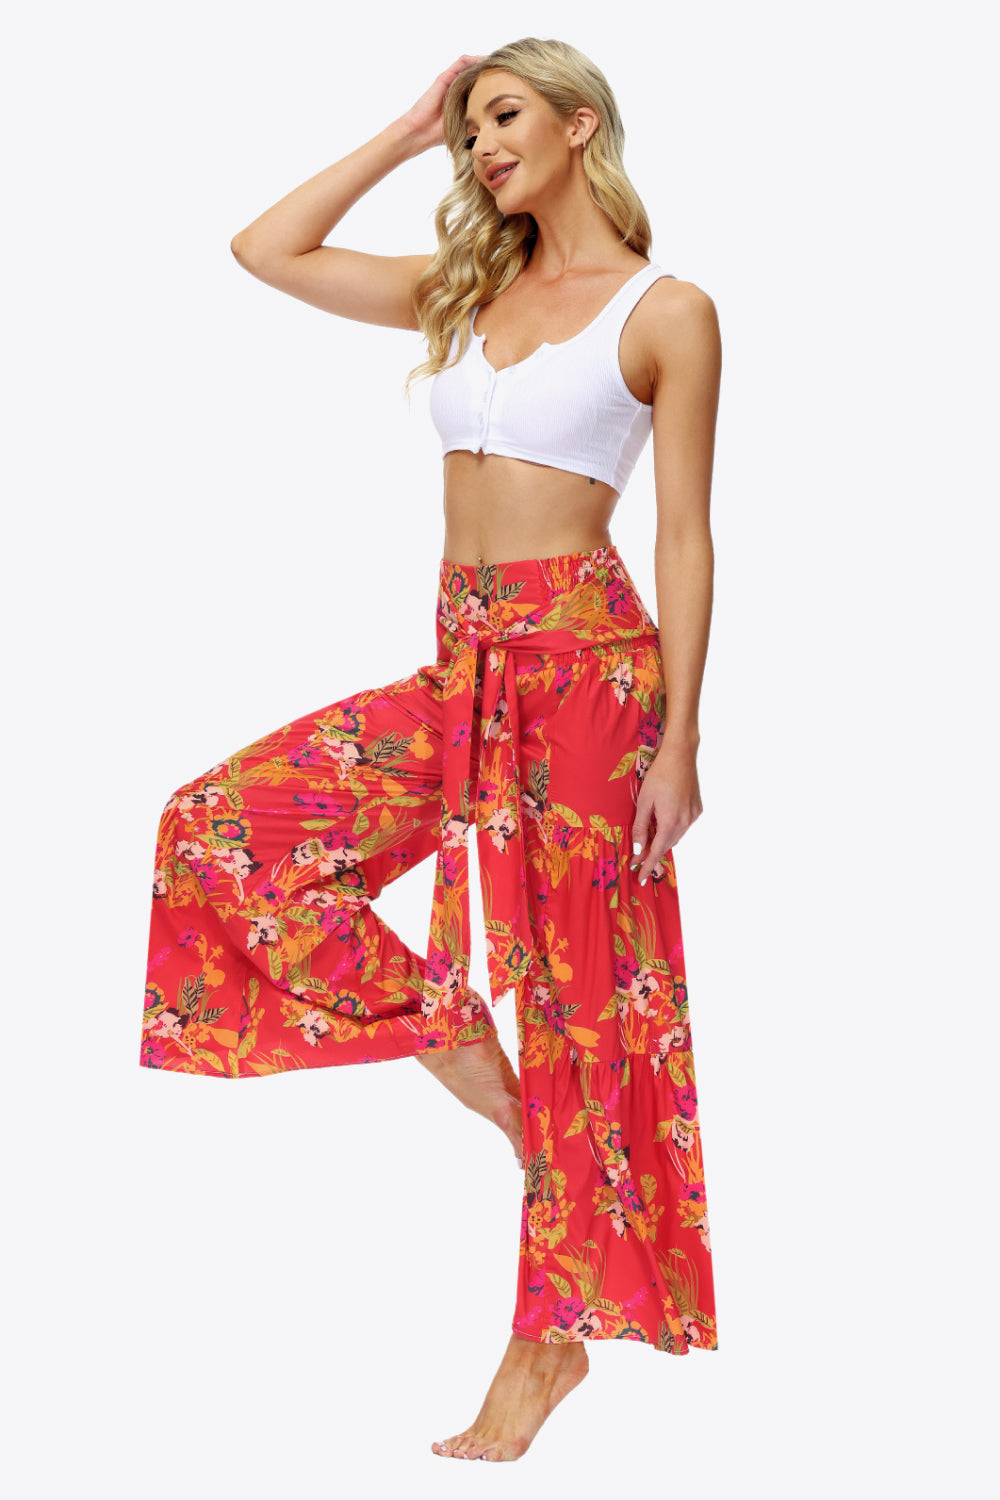 Floral Summer Vacation Culottes